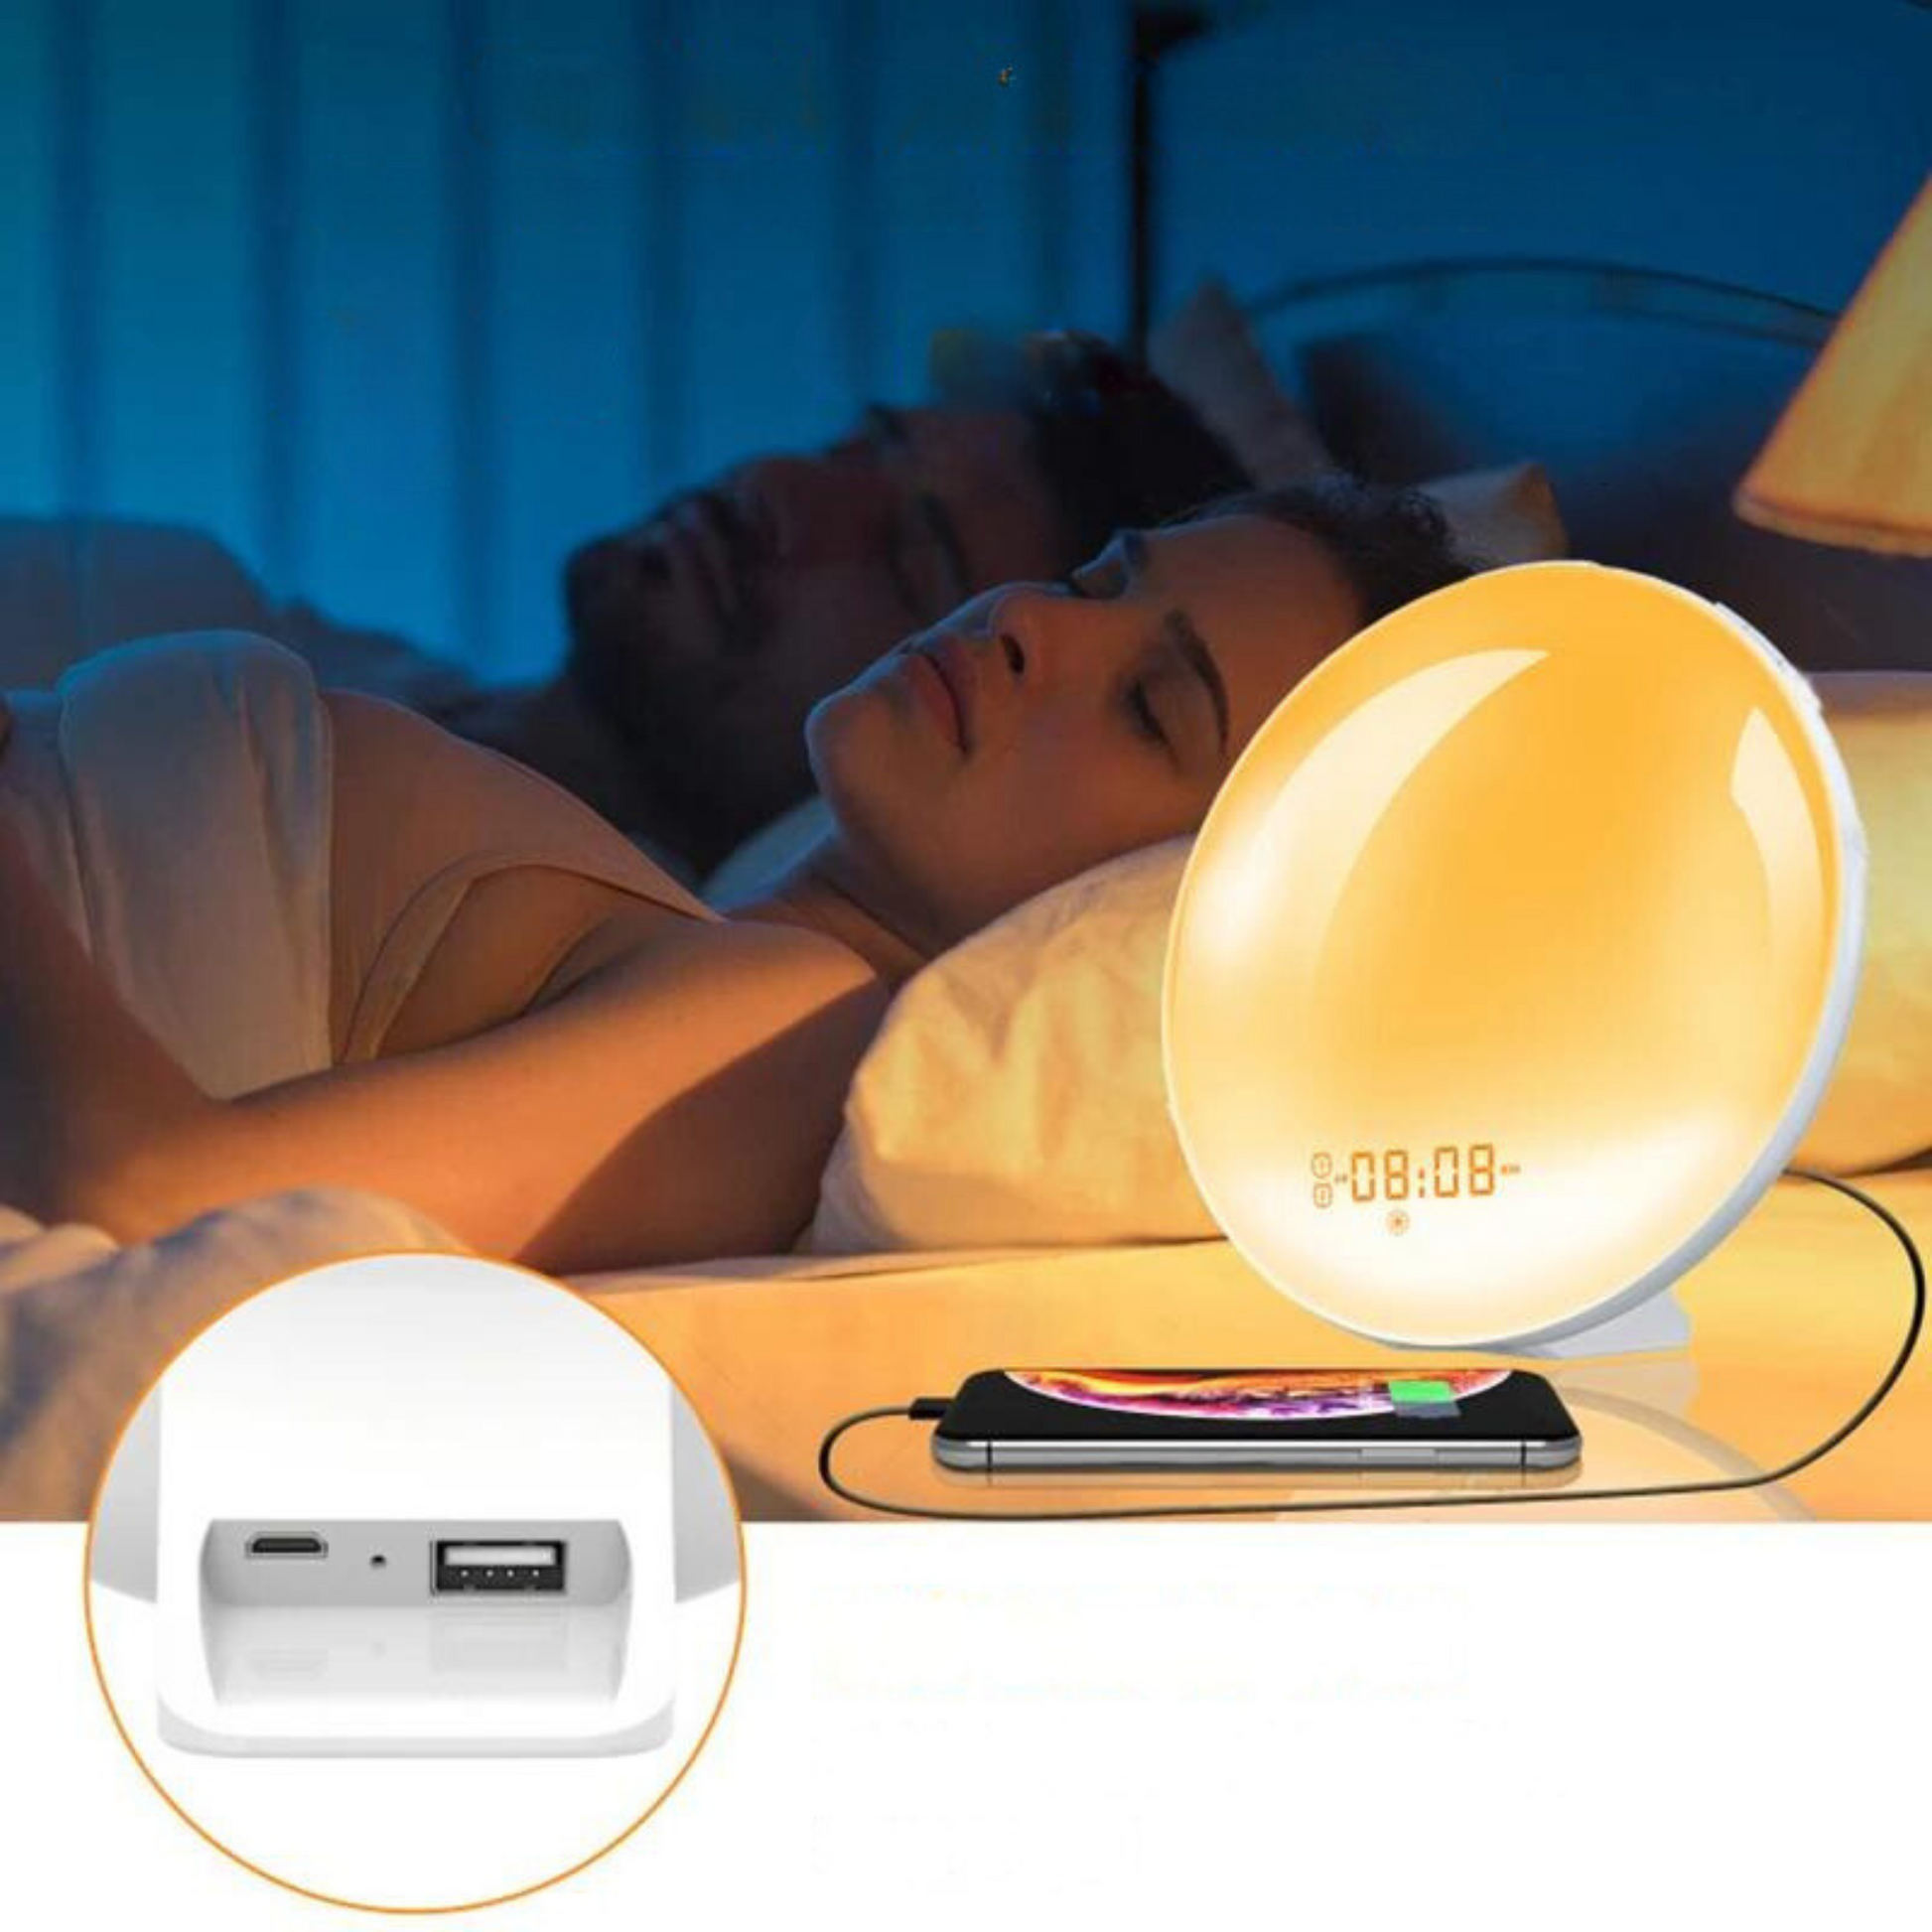 A yellow bedside lamp shows two alarm times, 08:25, with a USB charging port nearby. Ideal for dual alarms and nightlight use.